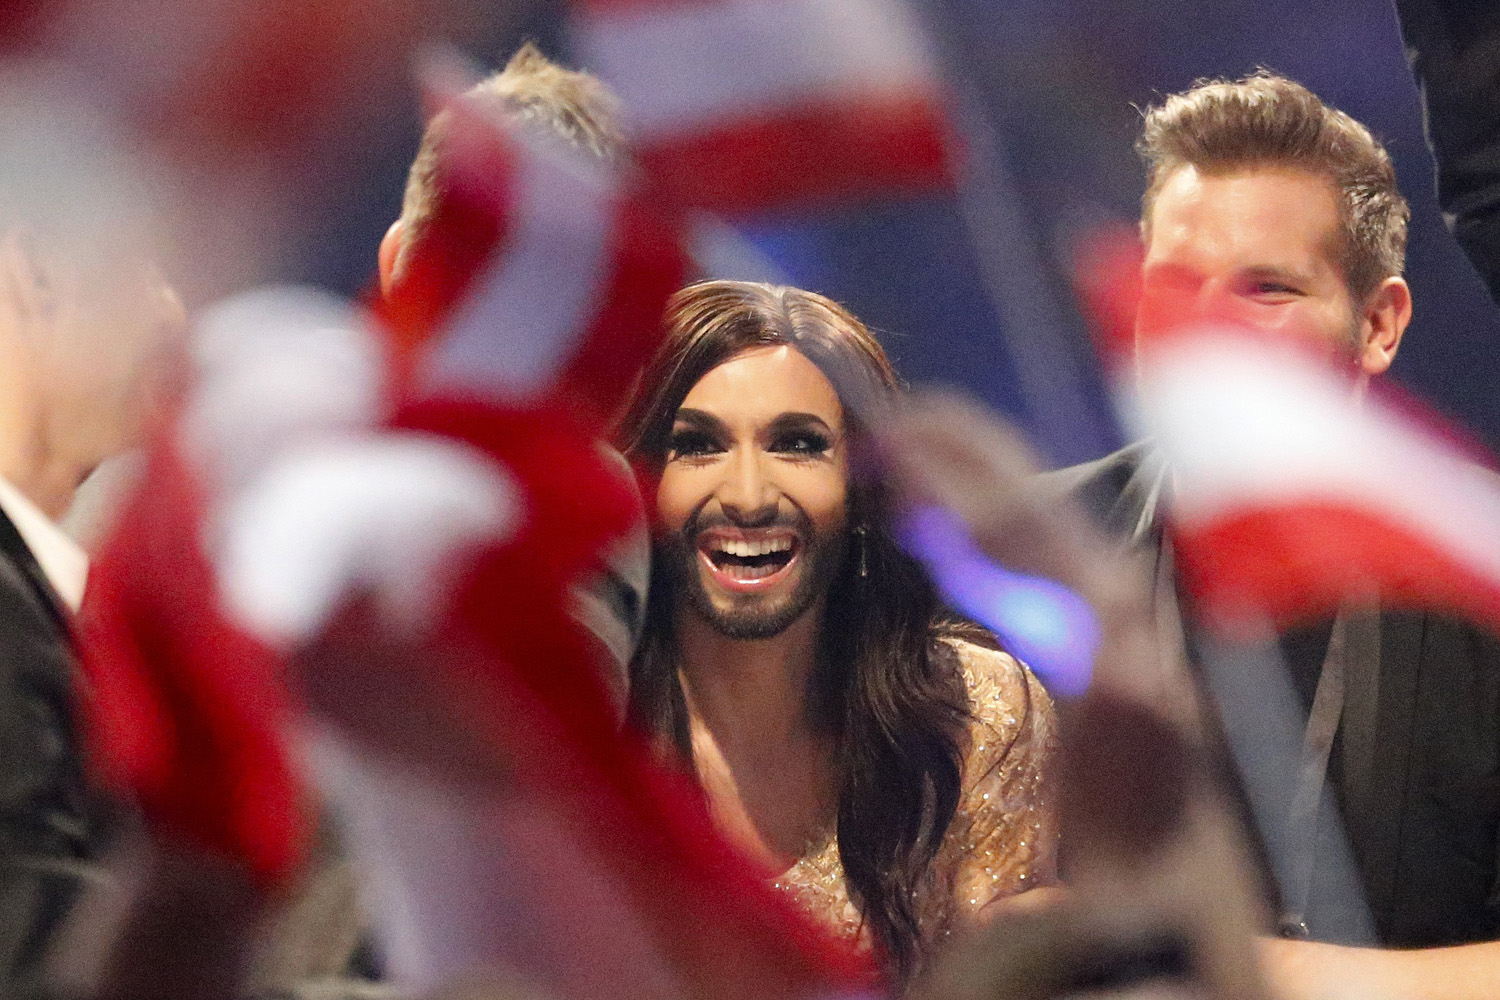 Singer Conchita Wurst representing Austria who performed the song 'Rise Like a Phoenix' listens as points are announced during the judging at the final of the Eurovision Song Contest in the B&W Halls in Copenhagen, on May 10, 2014.